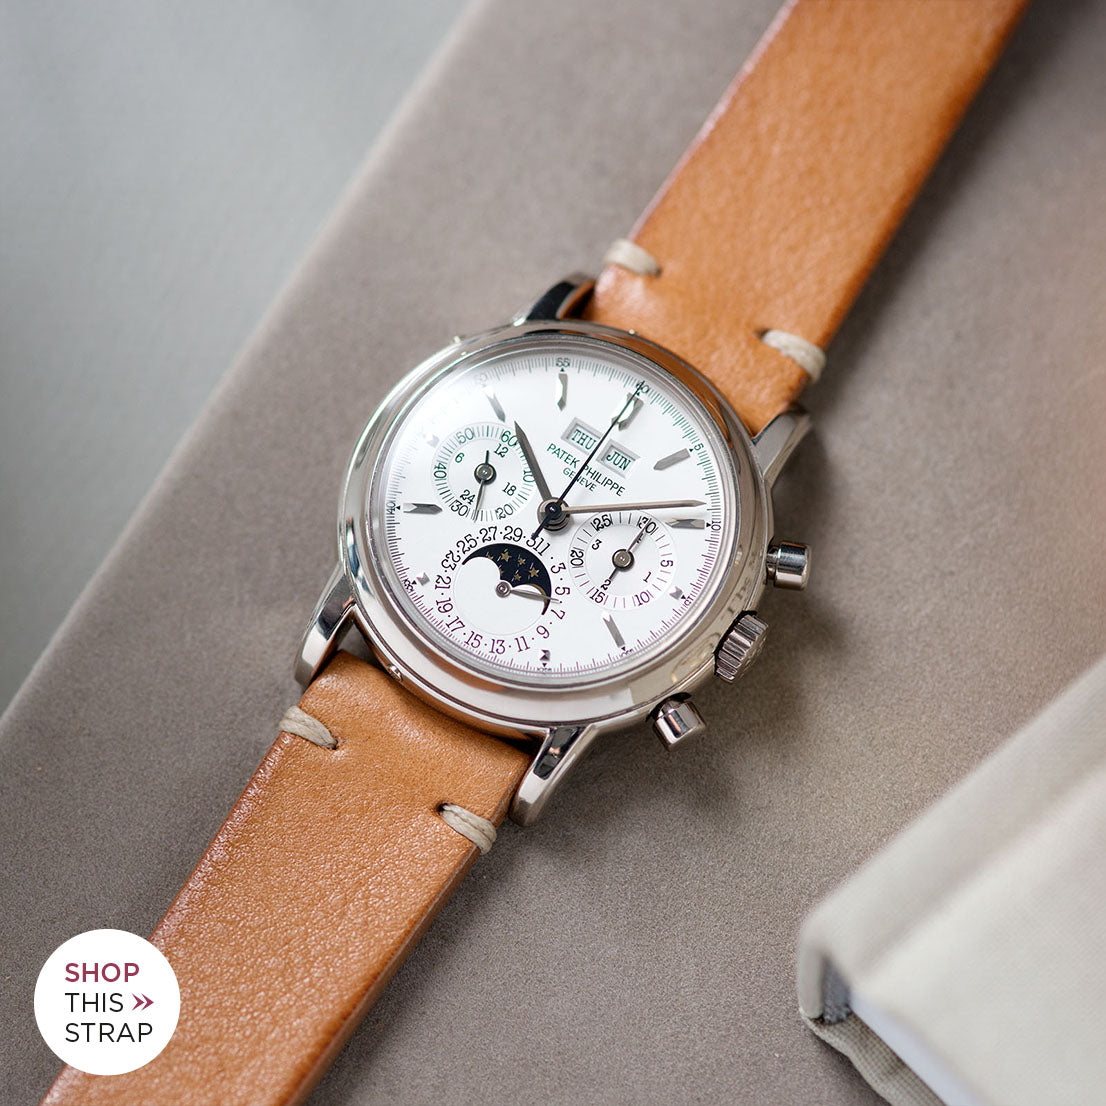 Bulang and Sons_Strap Guide_The Patek Philippe 3970 G White Gold Perpetual Calendar_Caramel Brown Leather Watch Strap